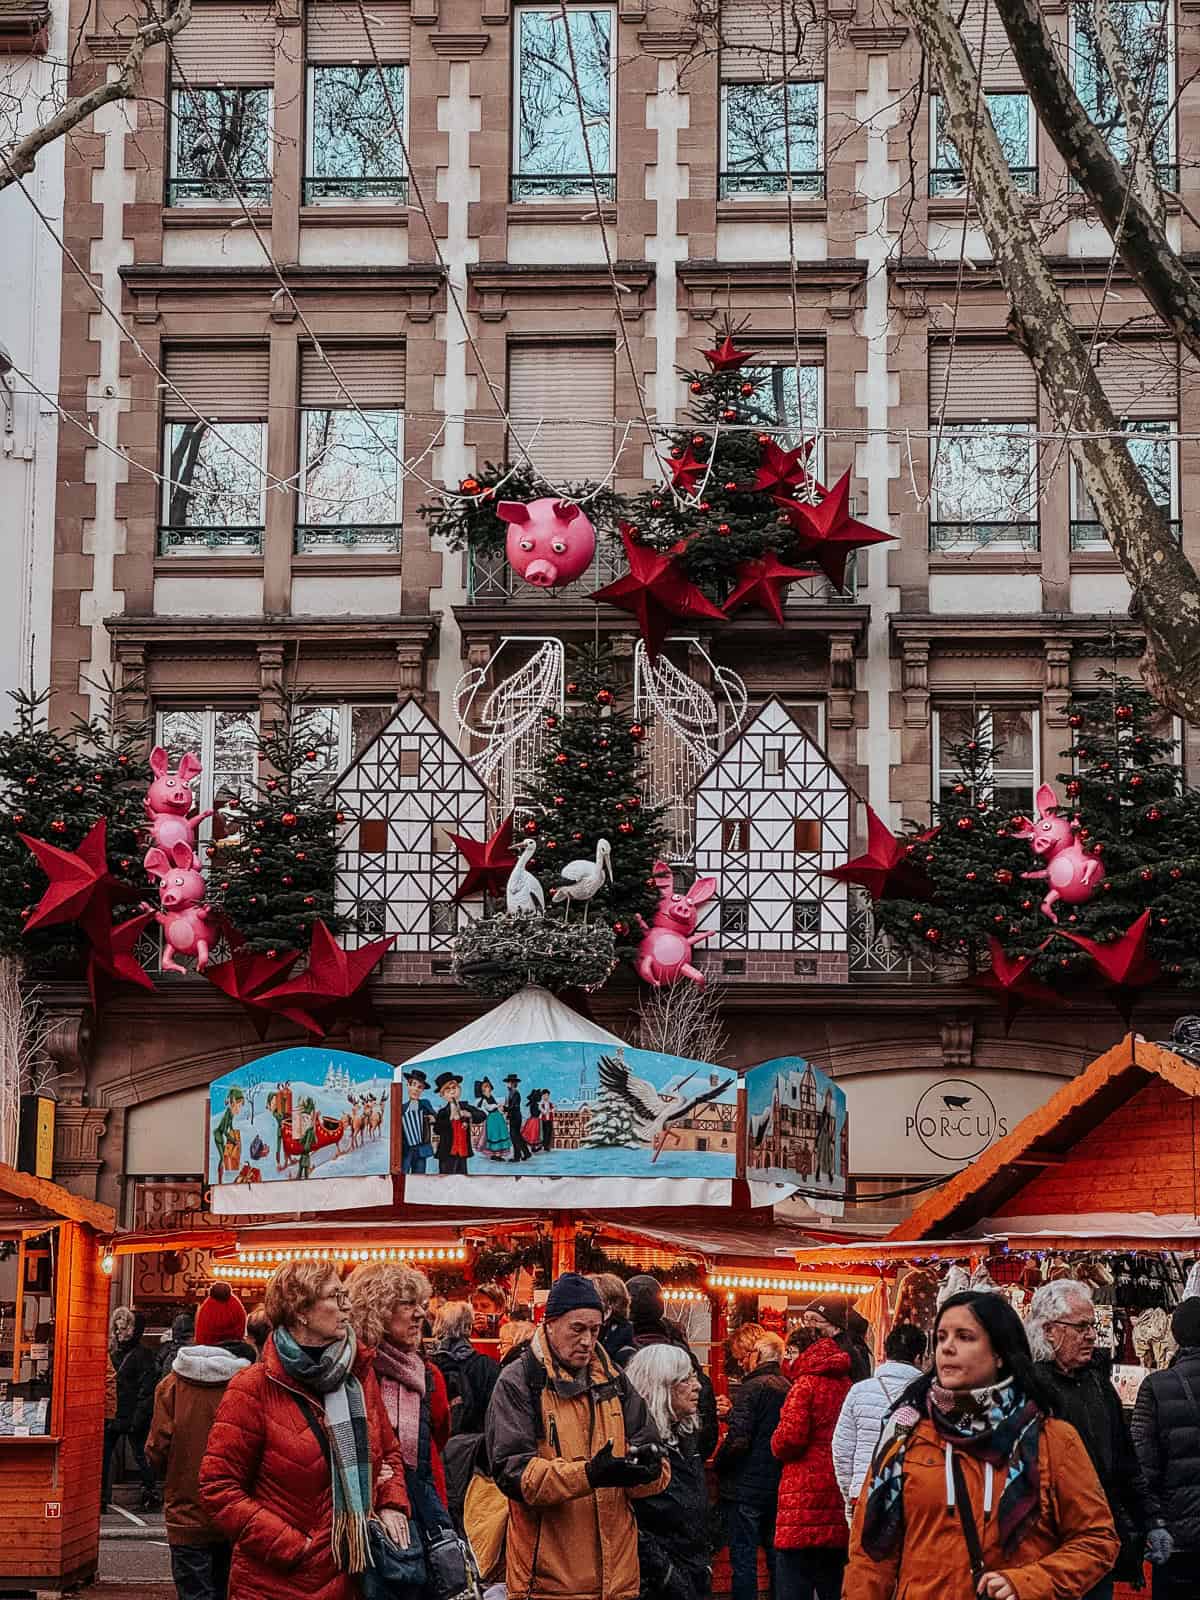 A building façade festively decorated with giant red stars and pink pig balloons, overhanging a Christmas market bustling with visitor